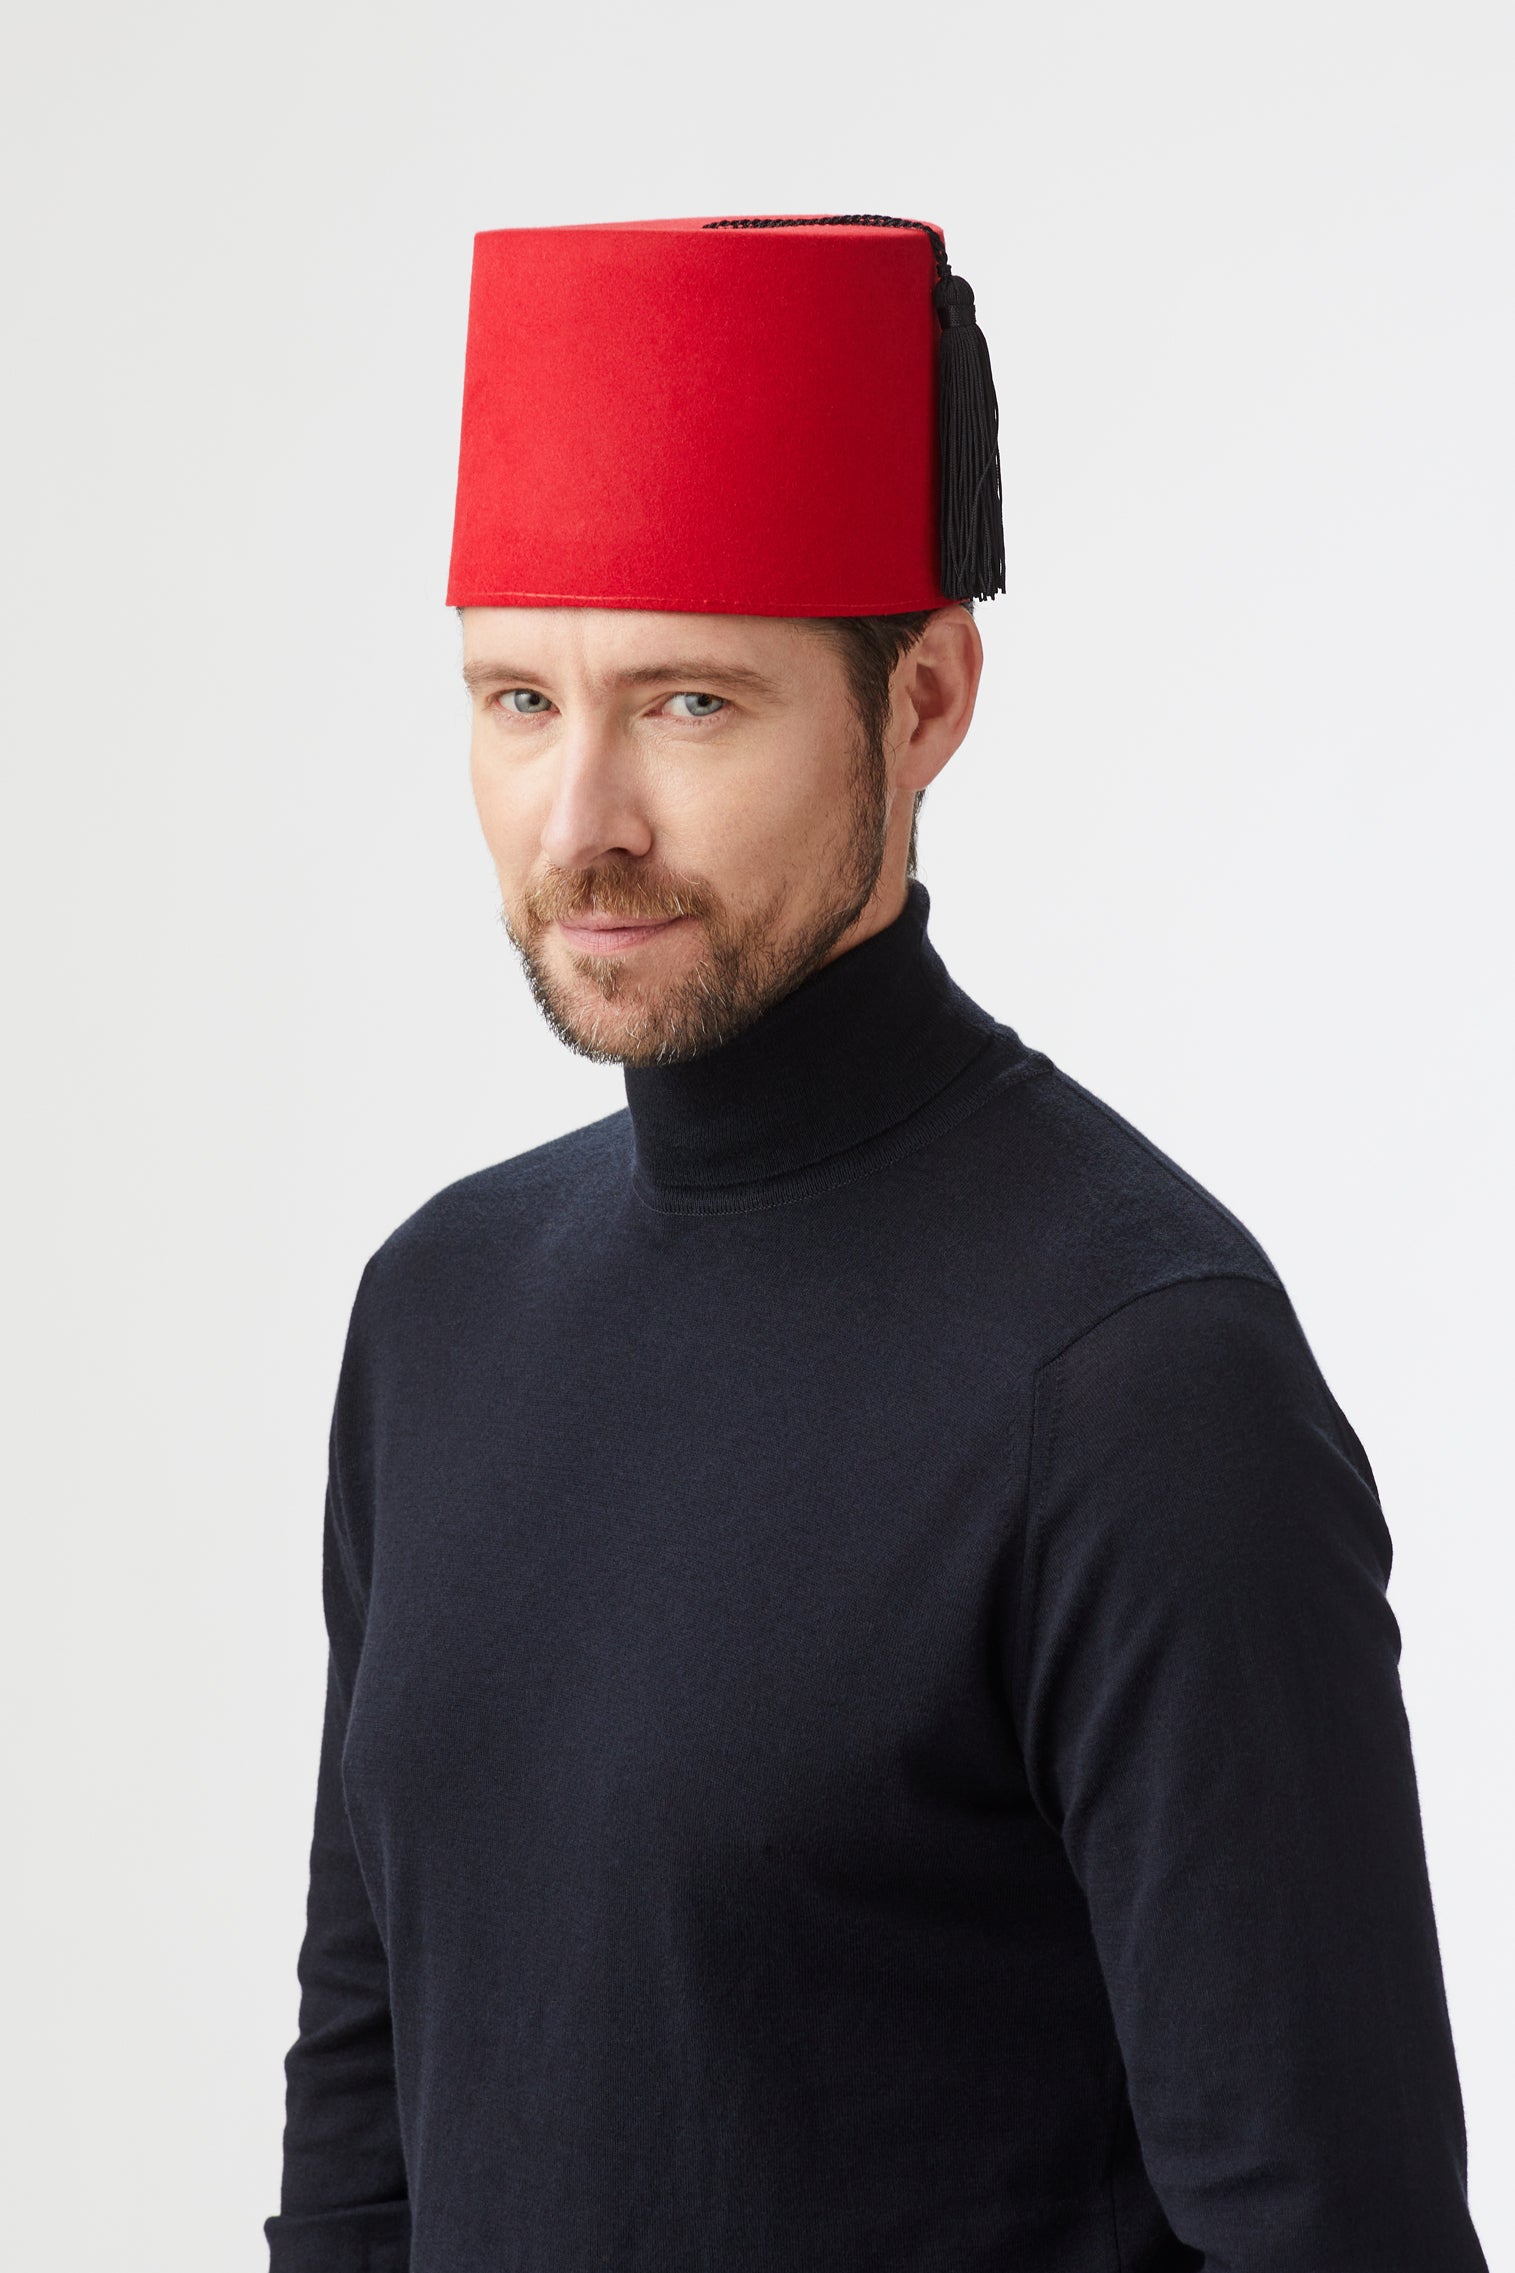 Fez - Products - Lock & Co. Hatters London UK